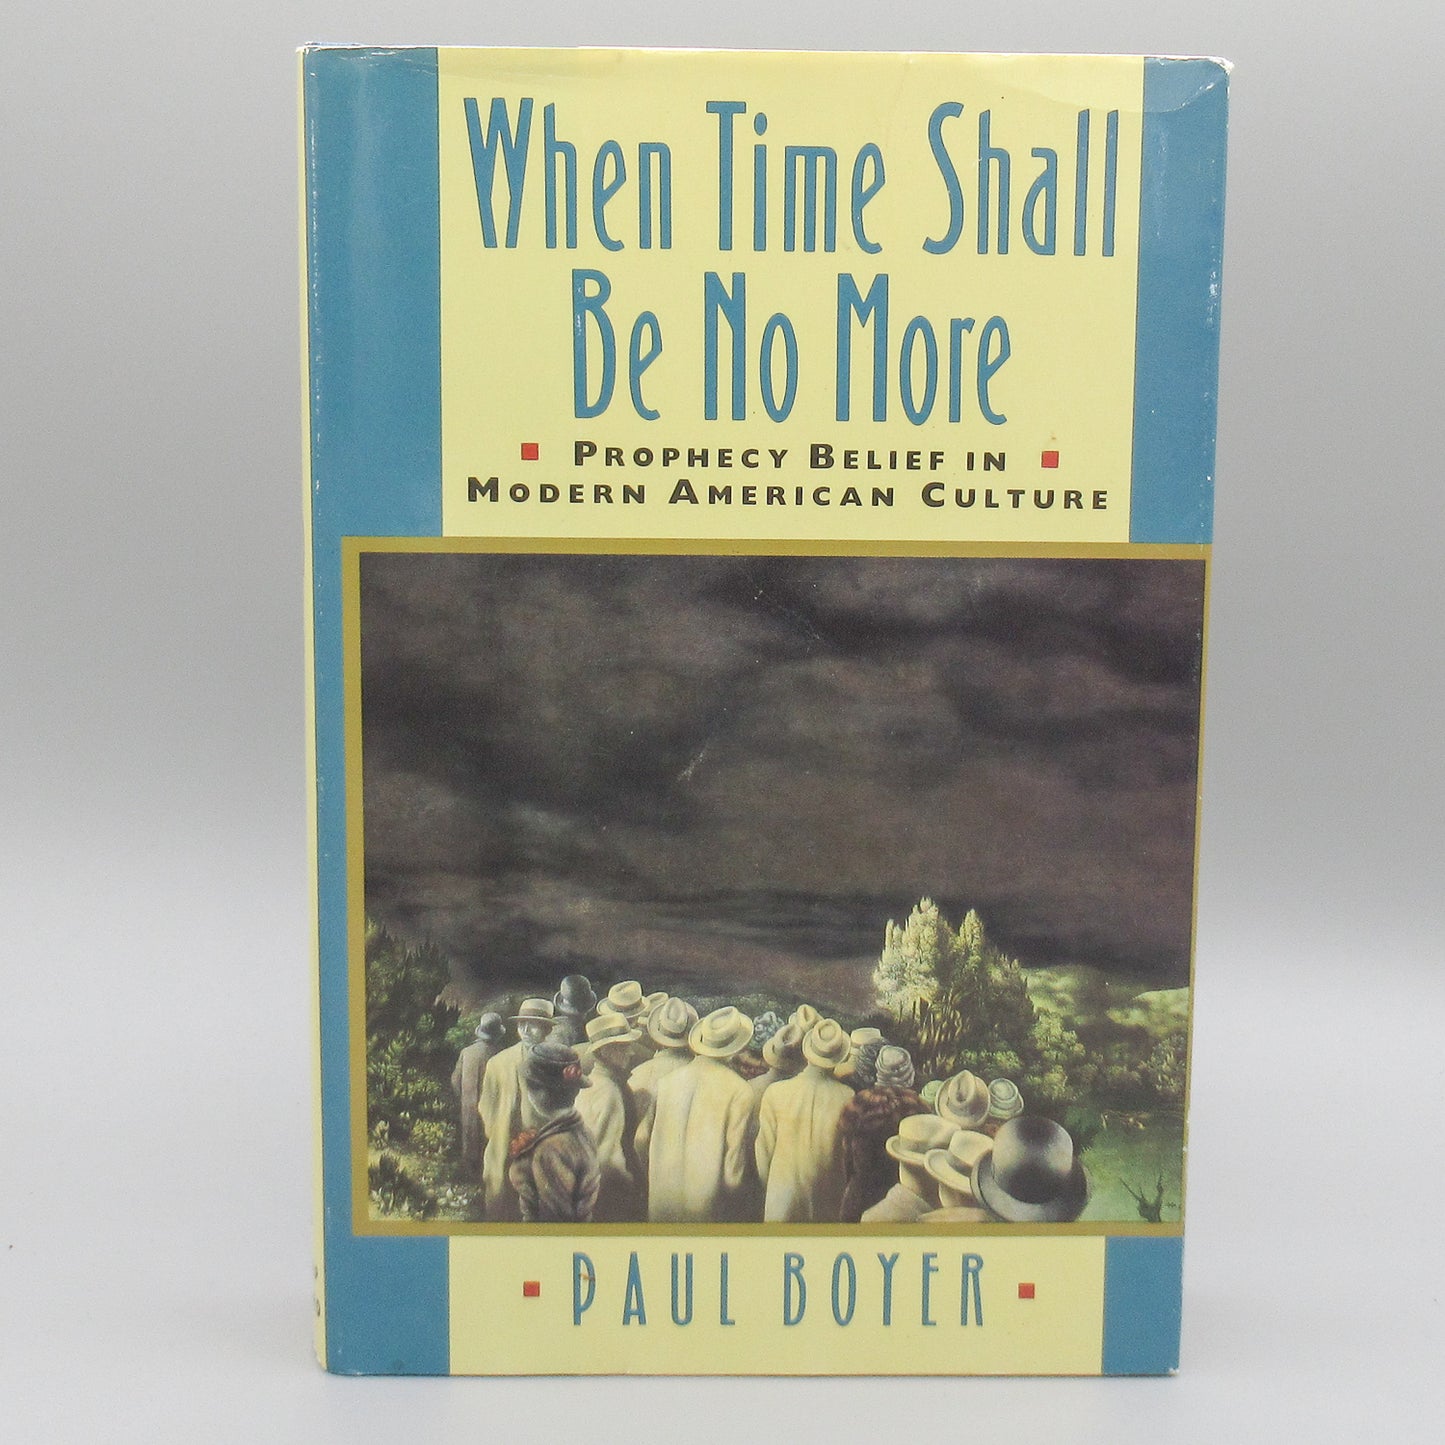 When Time Shall Be No More: Prophecy Belief in Modern American Culture ***